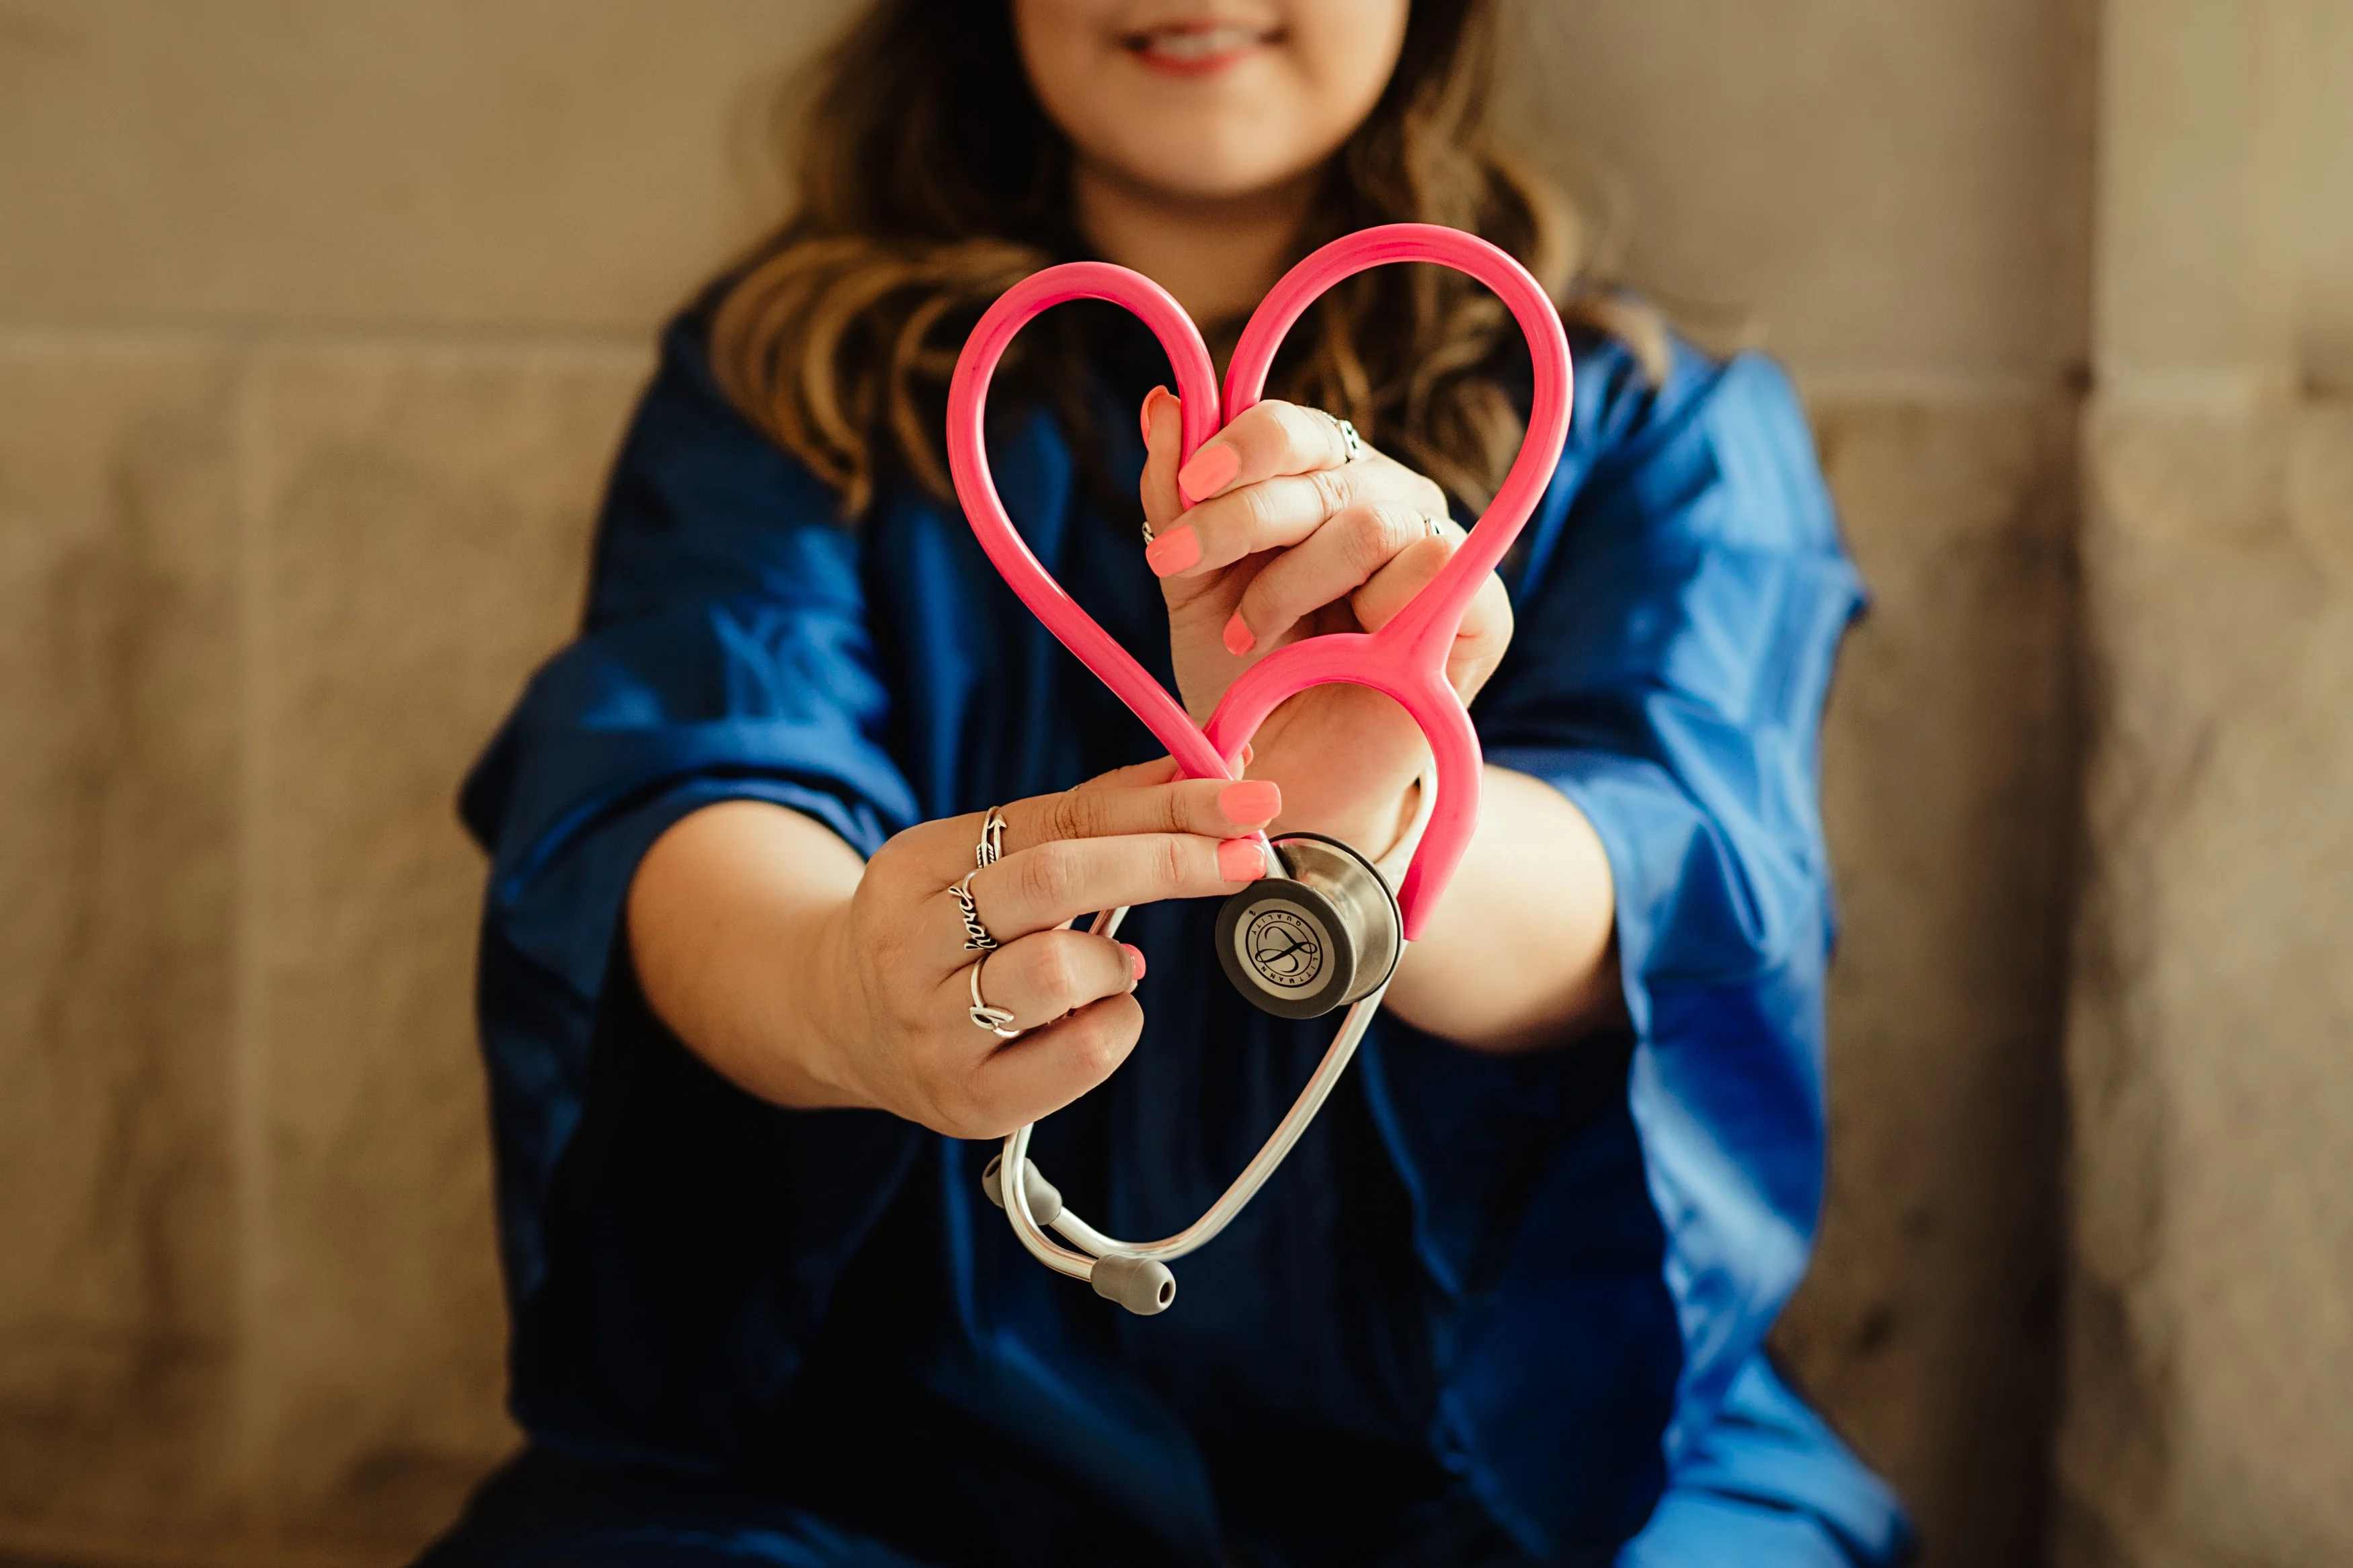 Healthcare worker holding pink stethoscope.